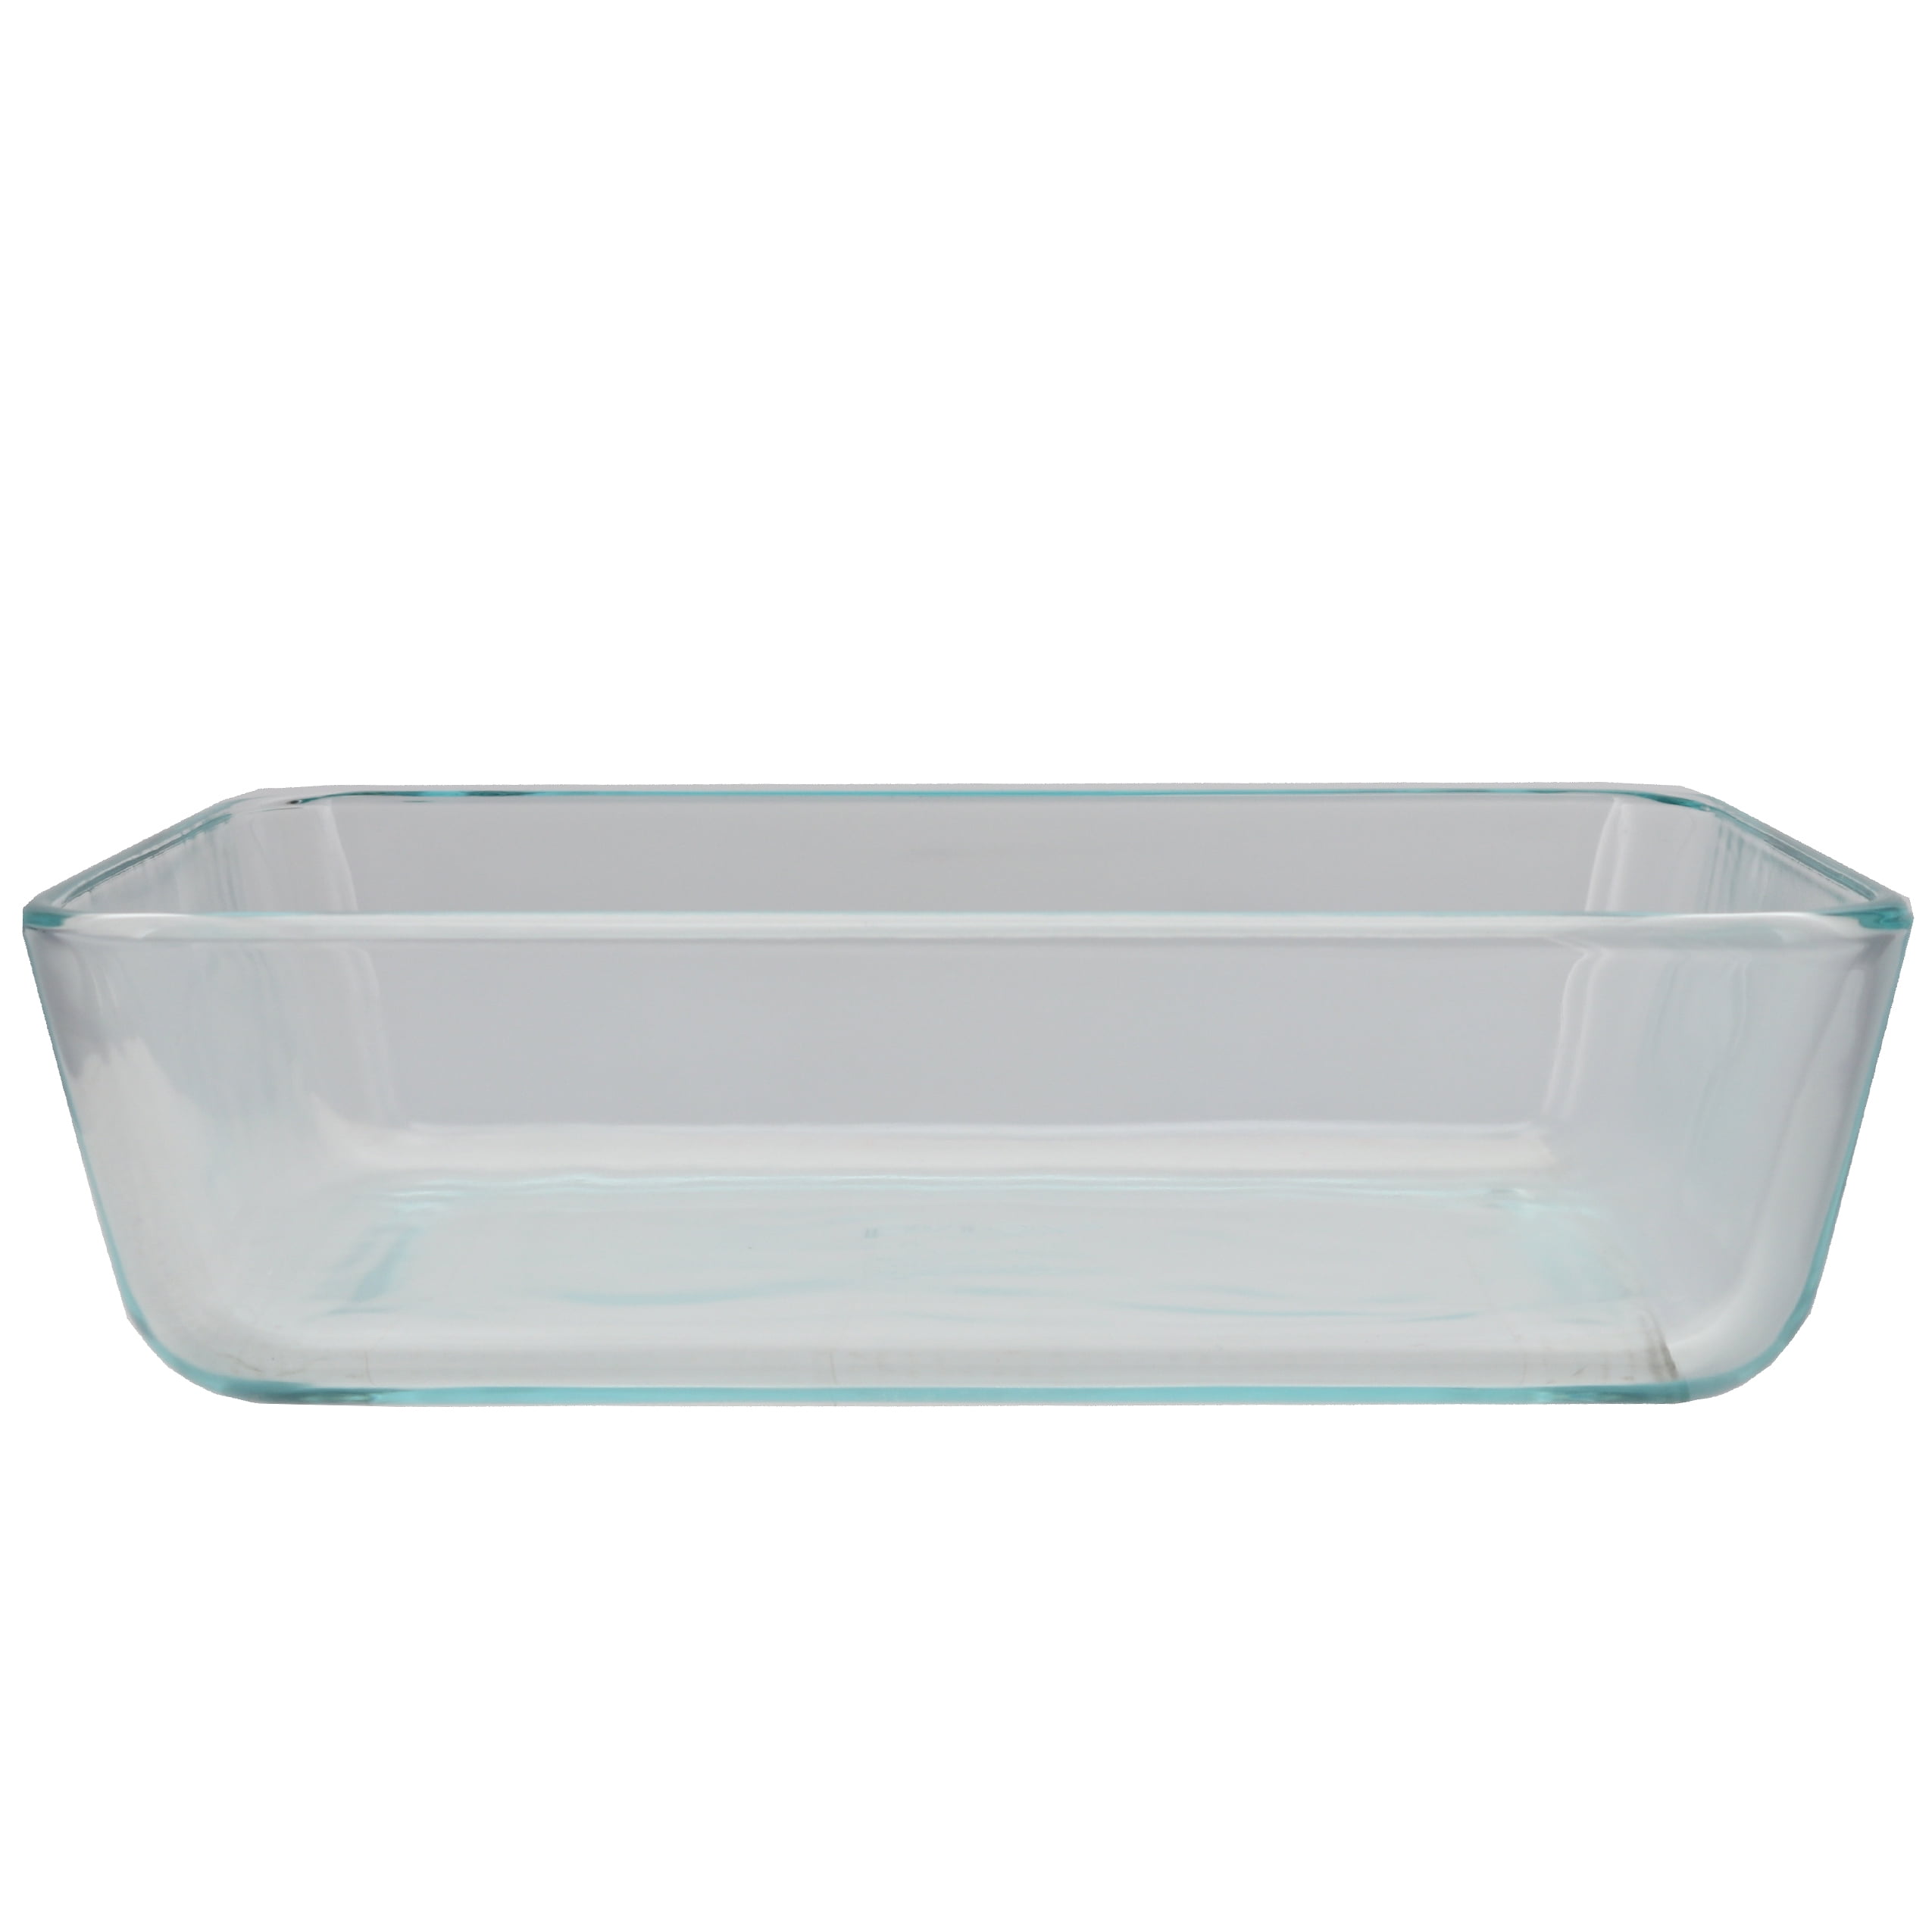 Pyrex 7210 3-Cup Rectangle Glass Food Storage Dishes w/ 7210-PC 3-Cup Red  Lid Covers (6-Pack)